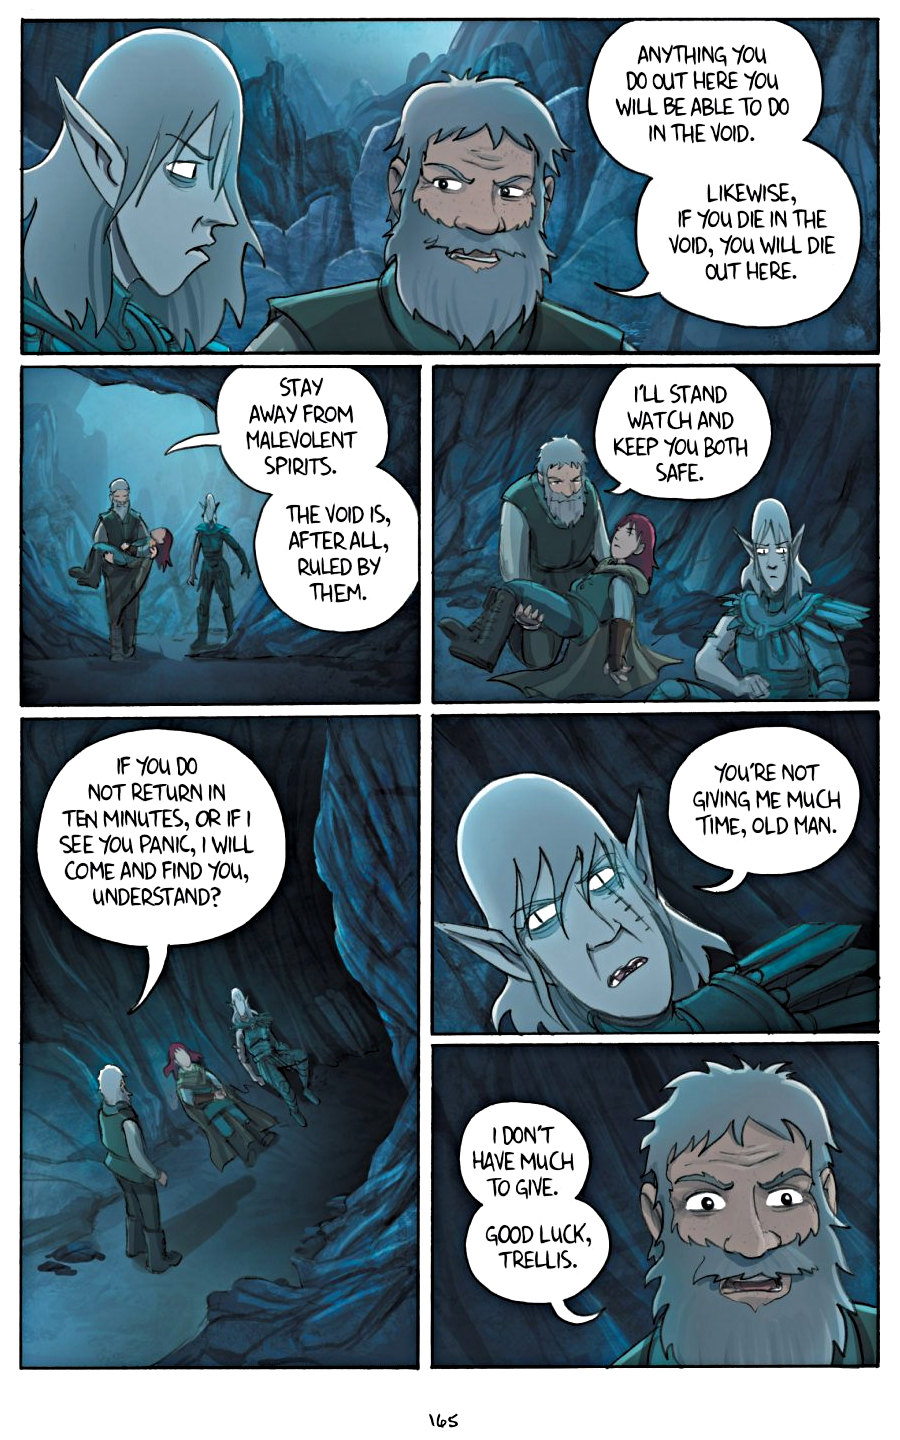 page 165 of amulet 5 prince of the elves graphic novel